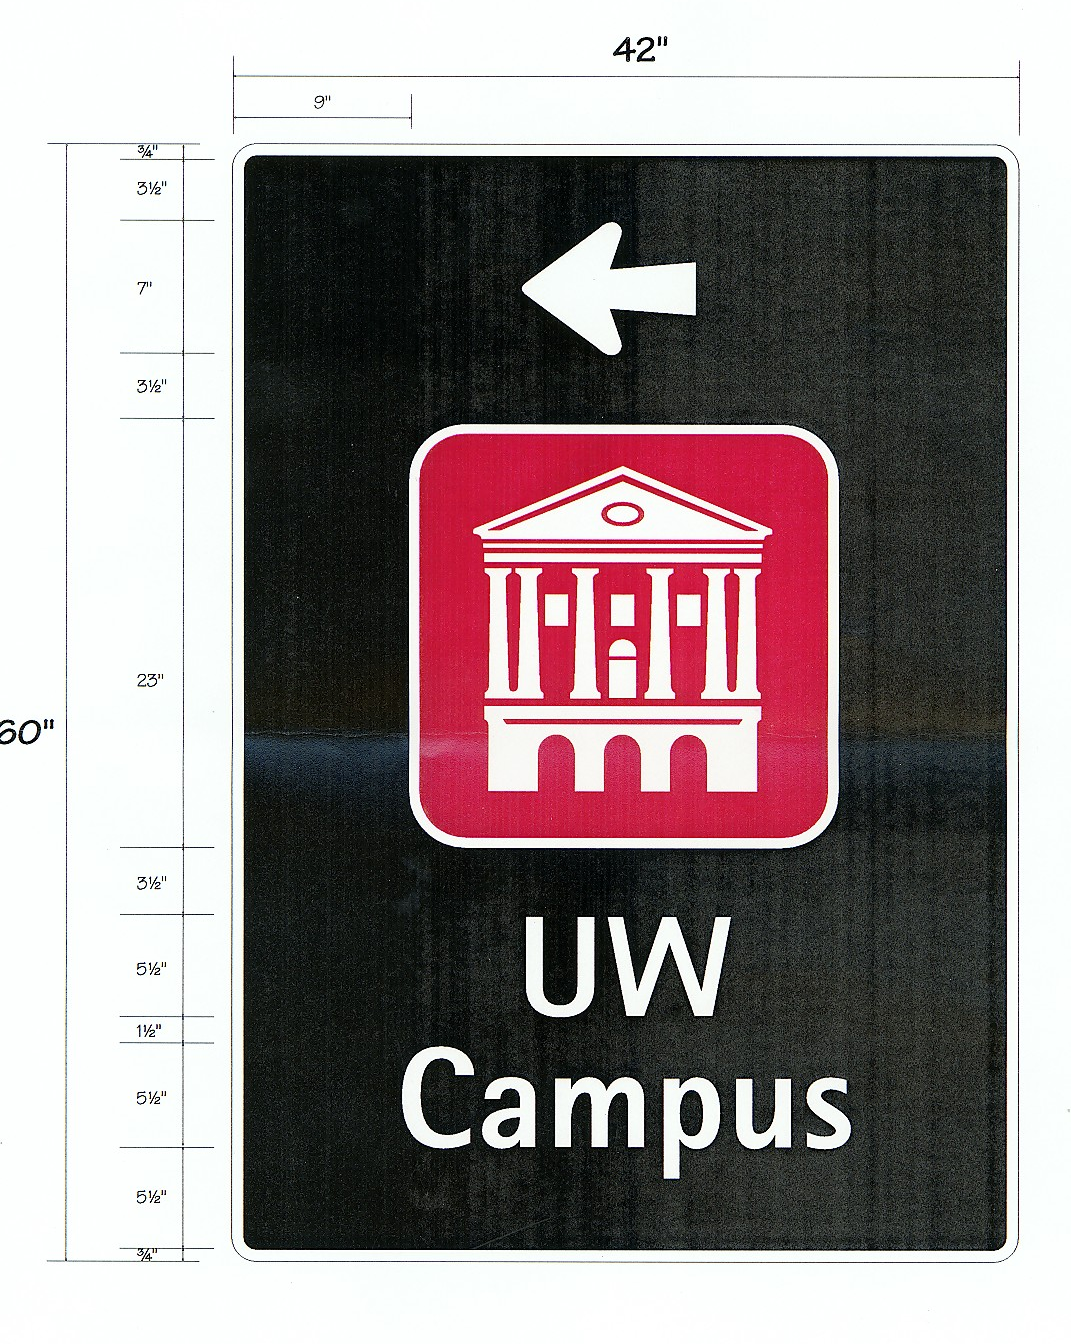 Image 2: an example of an off-campus trailblazer wayfinding sign, with measuremnts for scale.